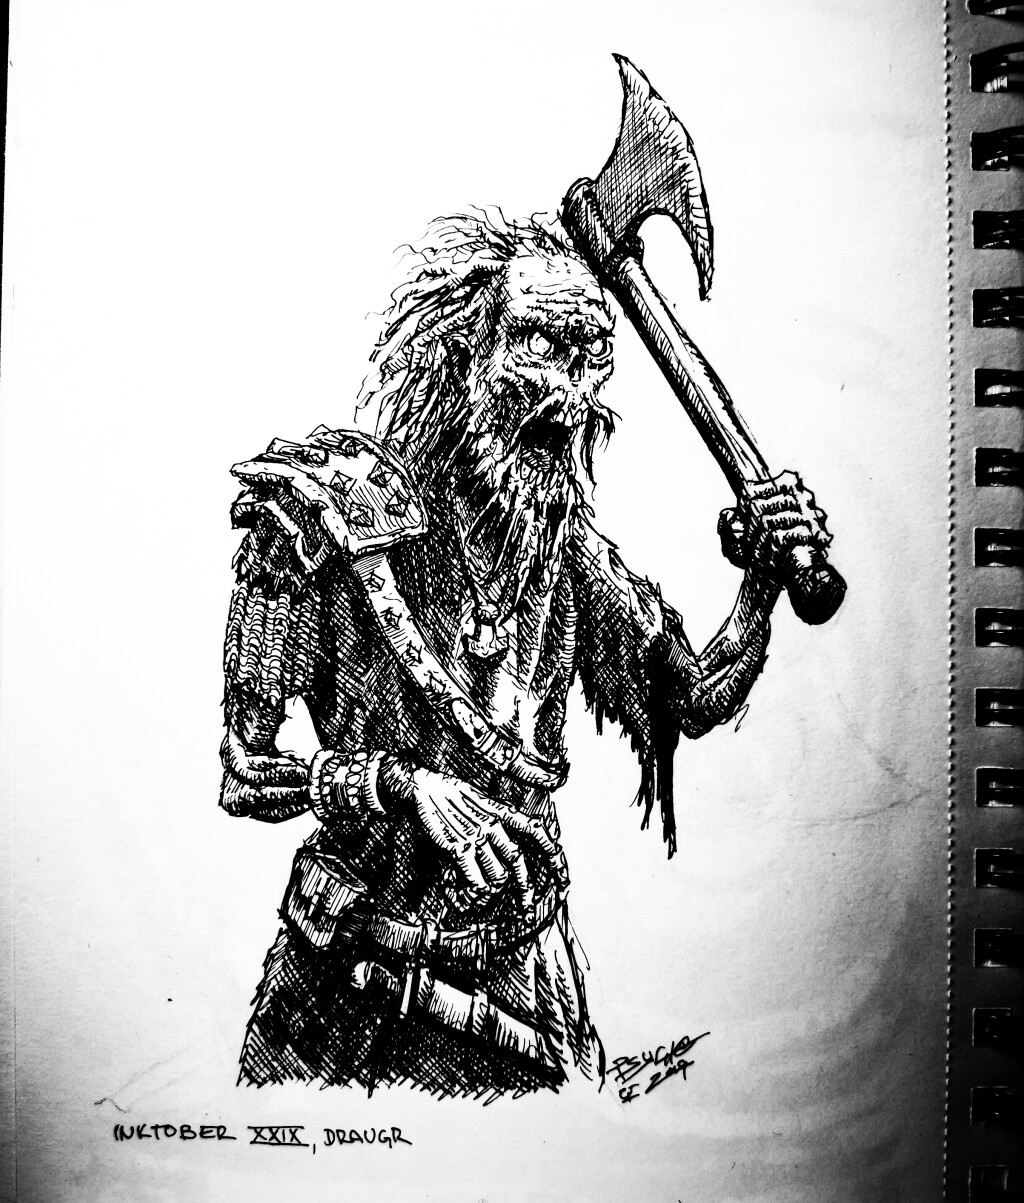 Draugr - Found in Norse folklore Draugr are animated corpses that come back to life simply to harm the living.